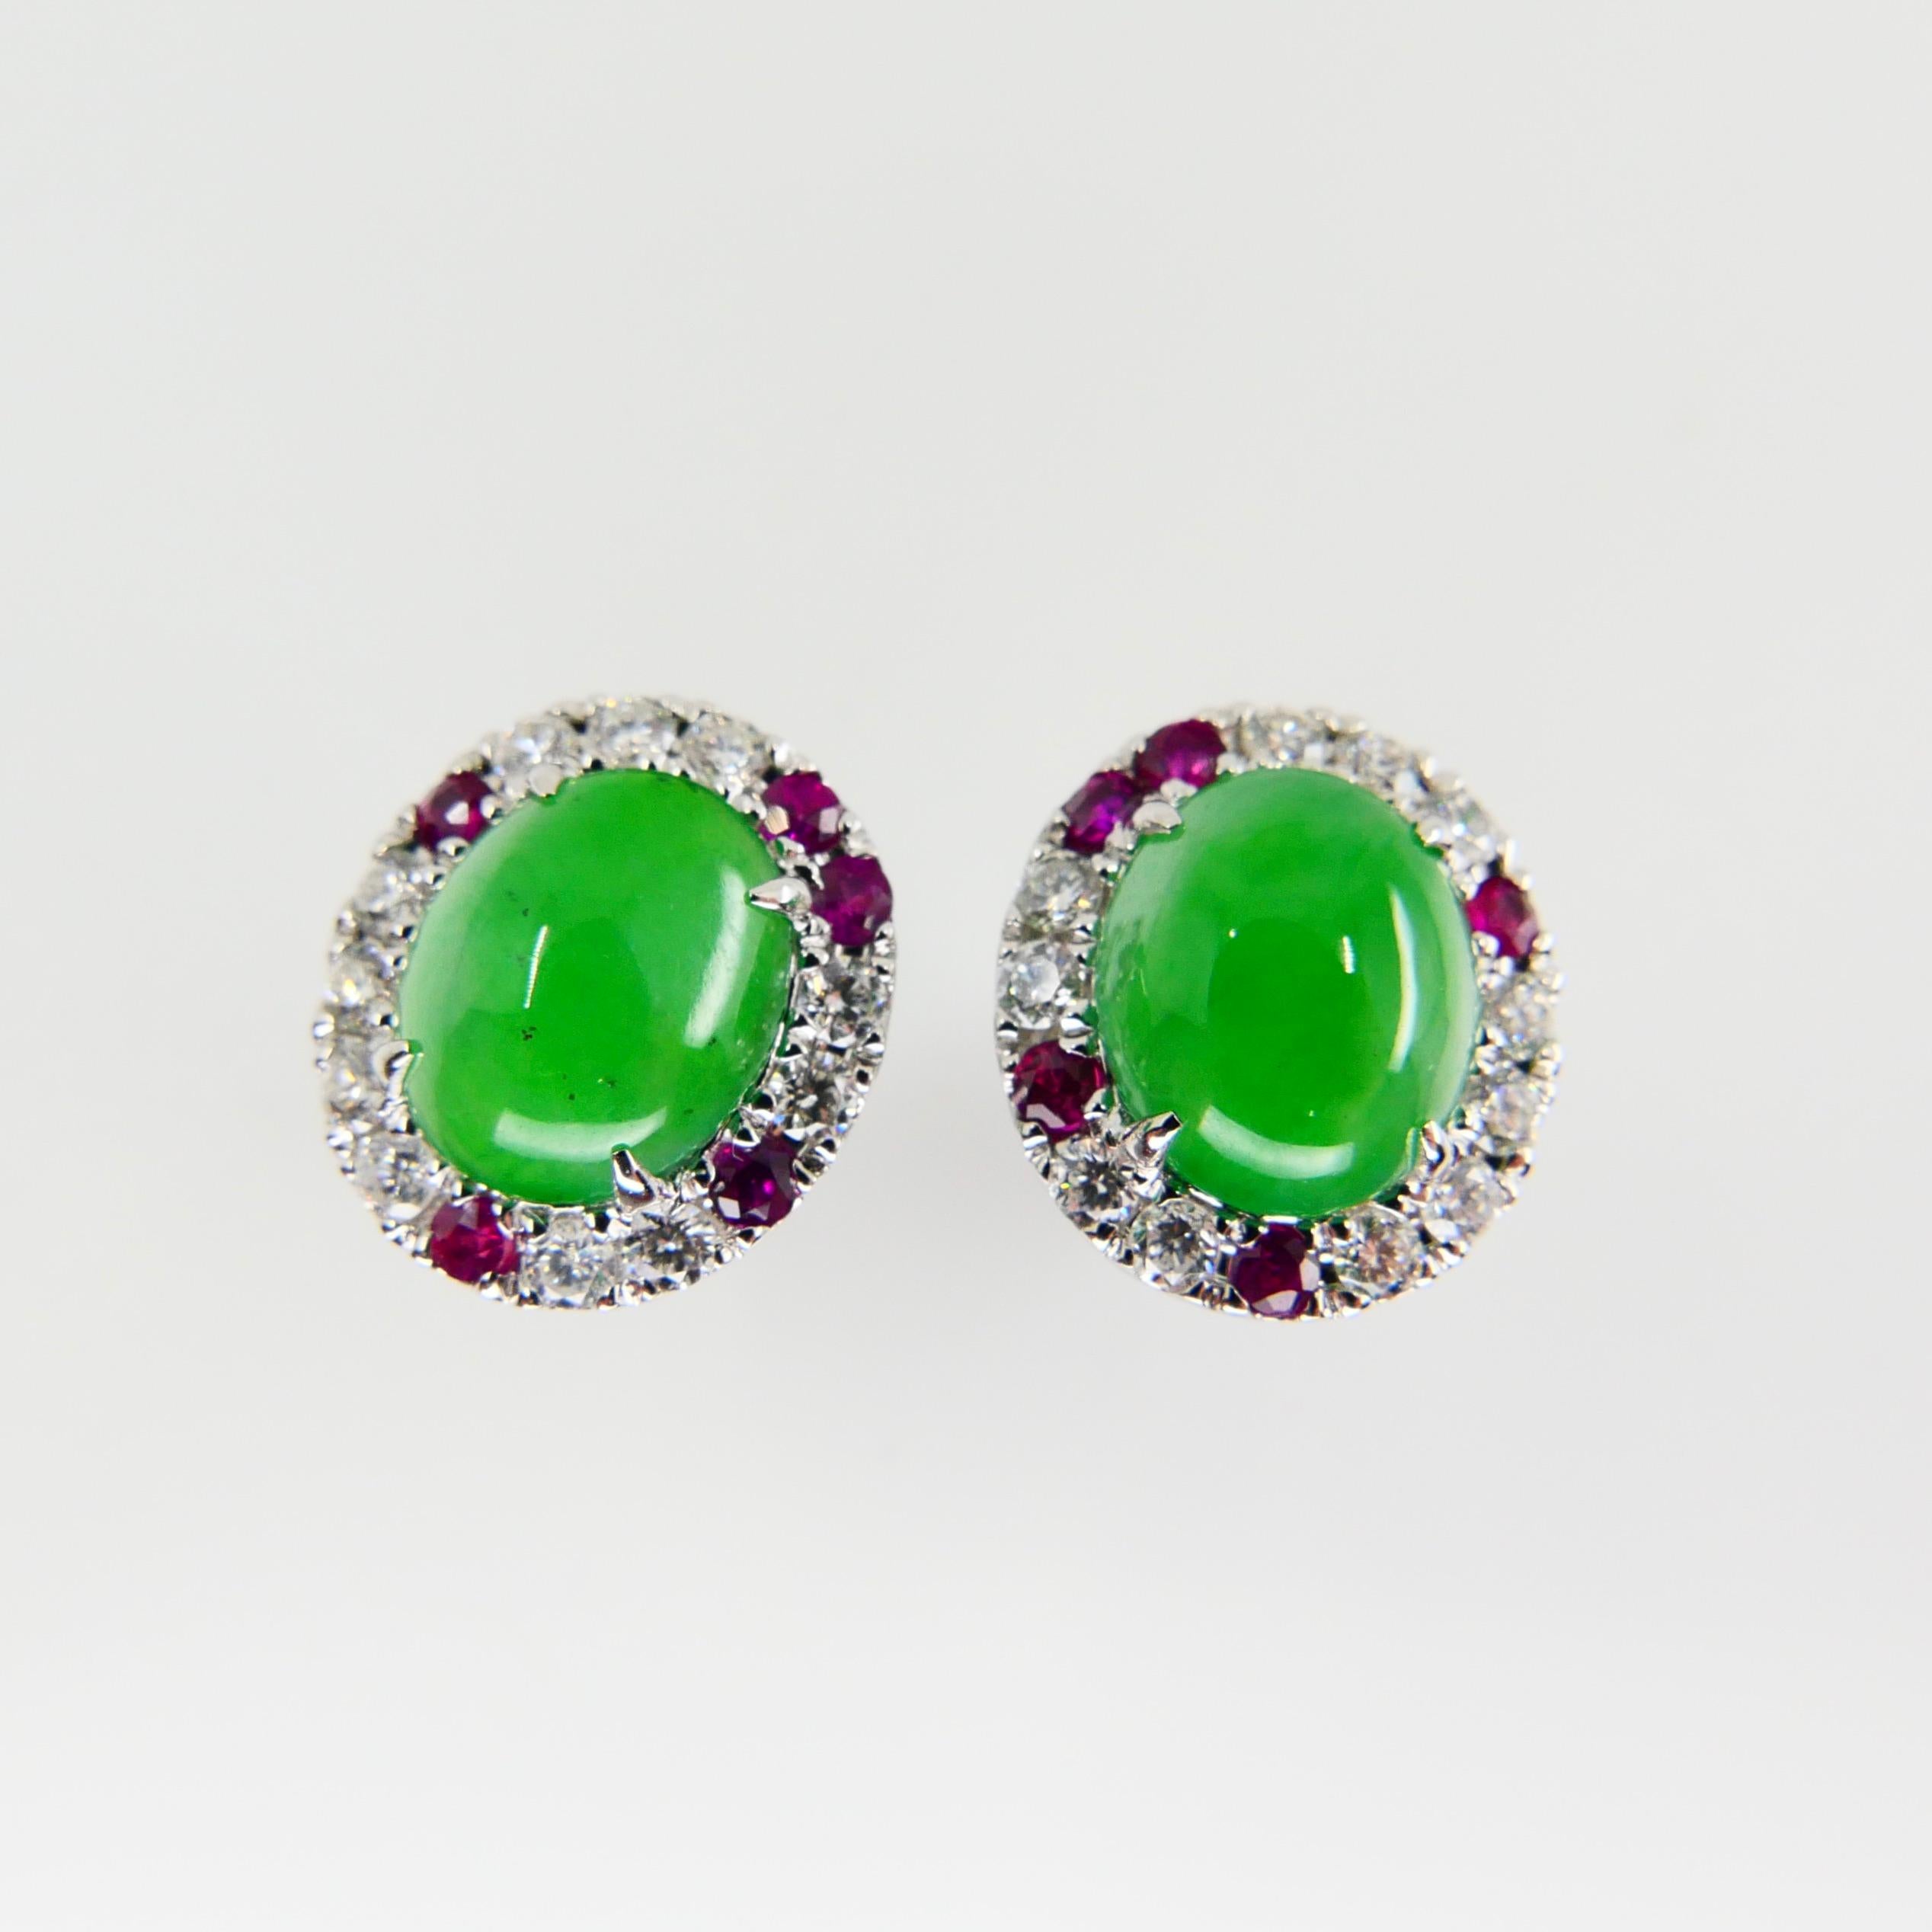 Cabochon Certified Natural Type A Jade, Ruby and Diamond Stud Earrings, Apple Green Color